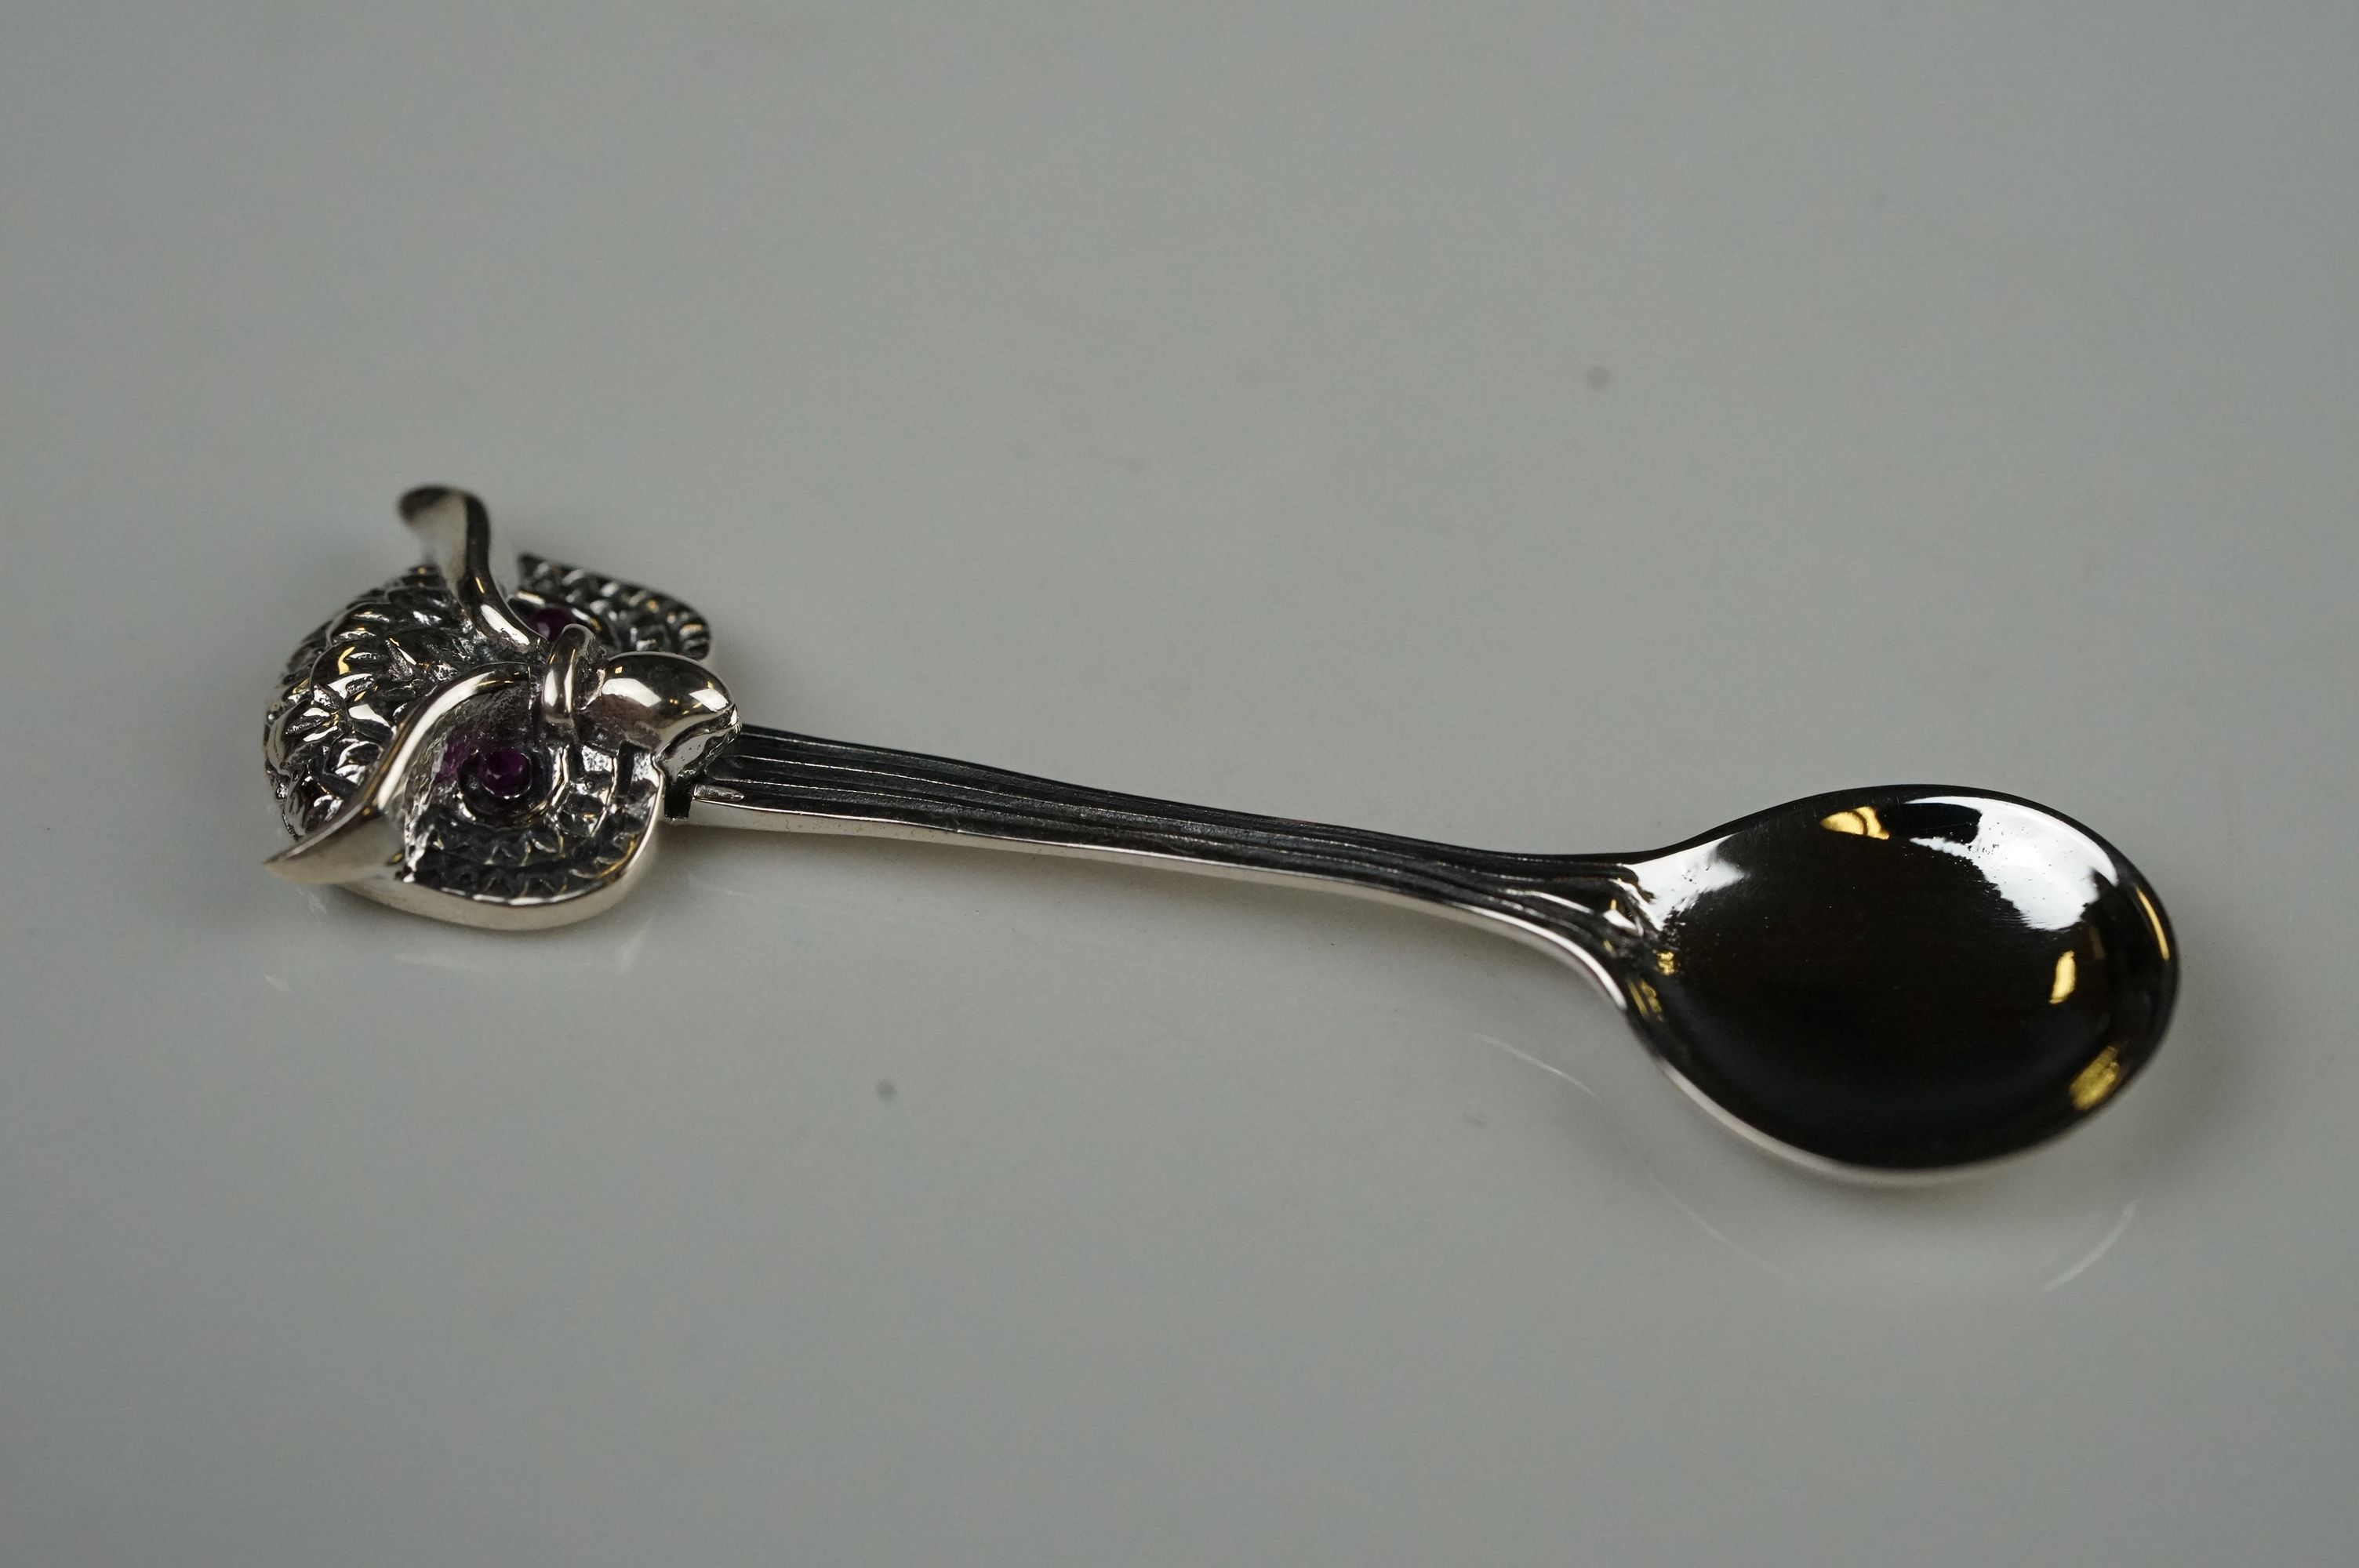 Silver salt spoon with owl finial - Image 2 of 5